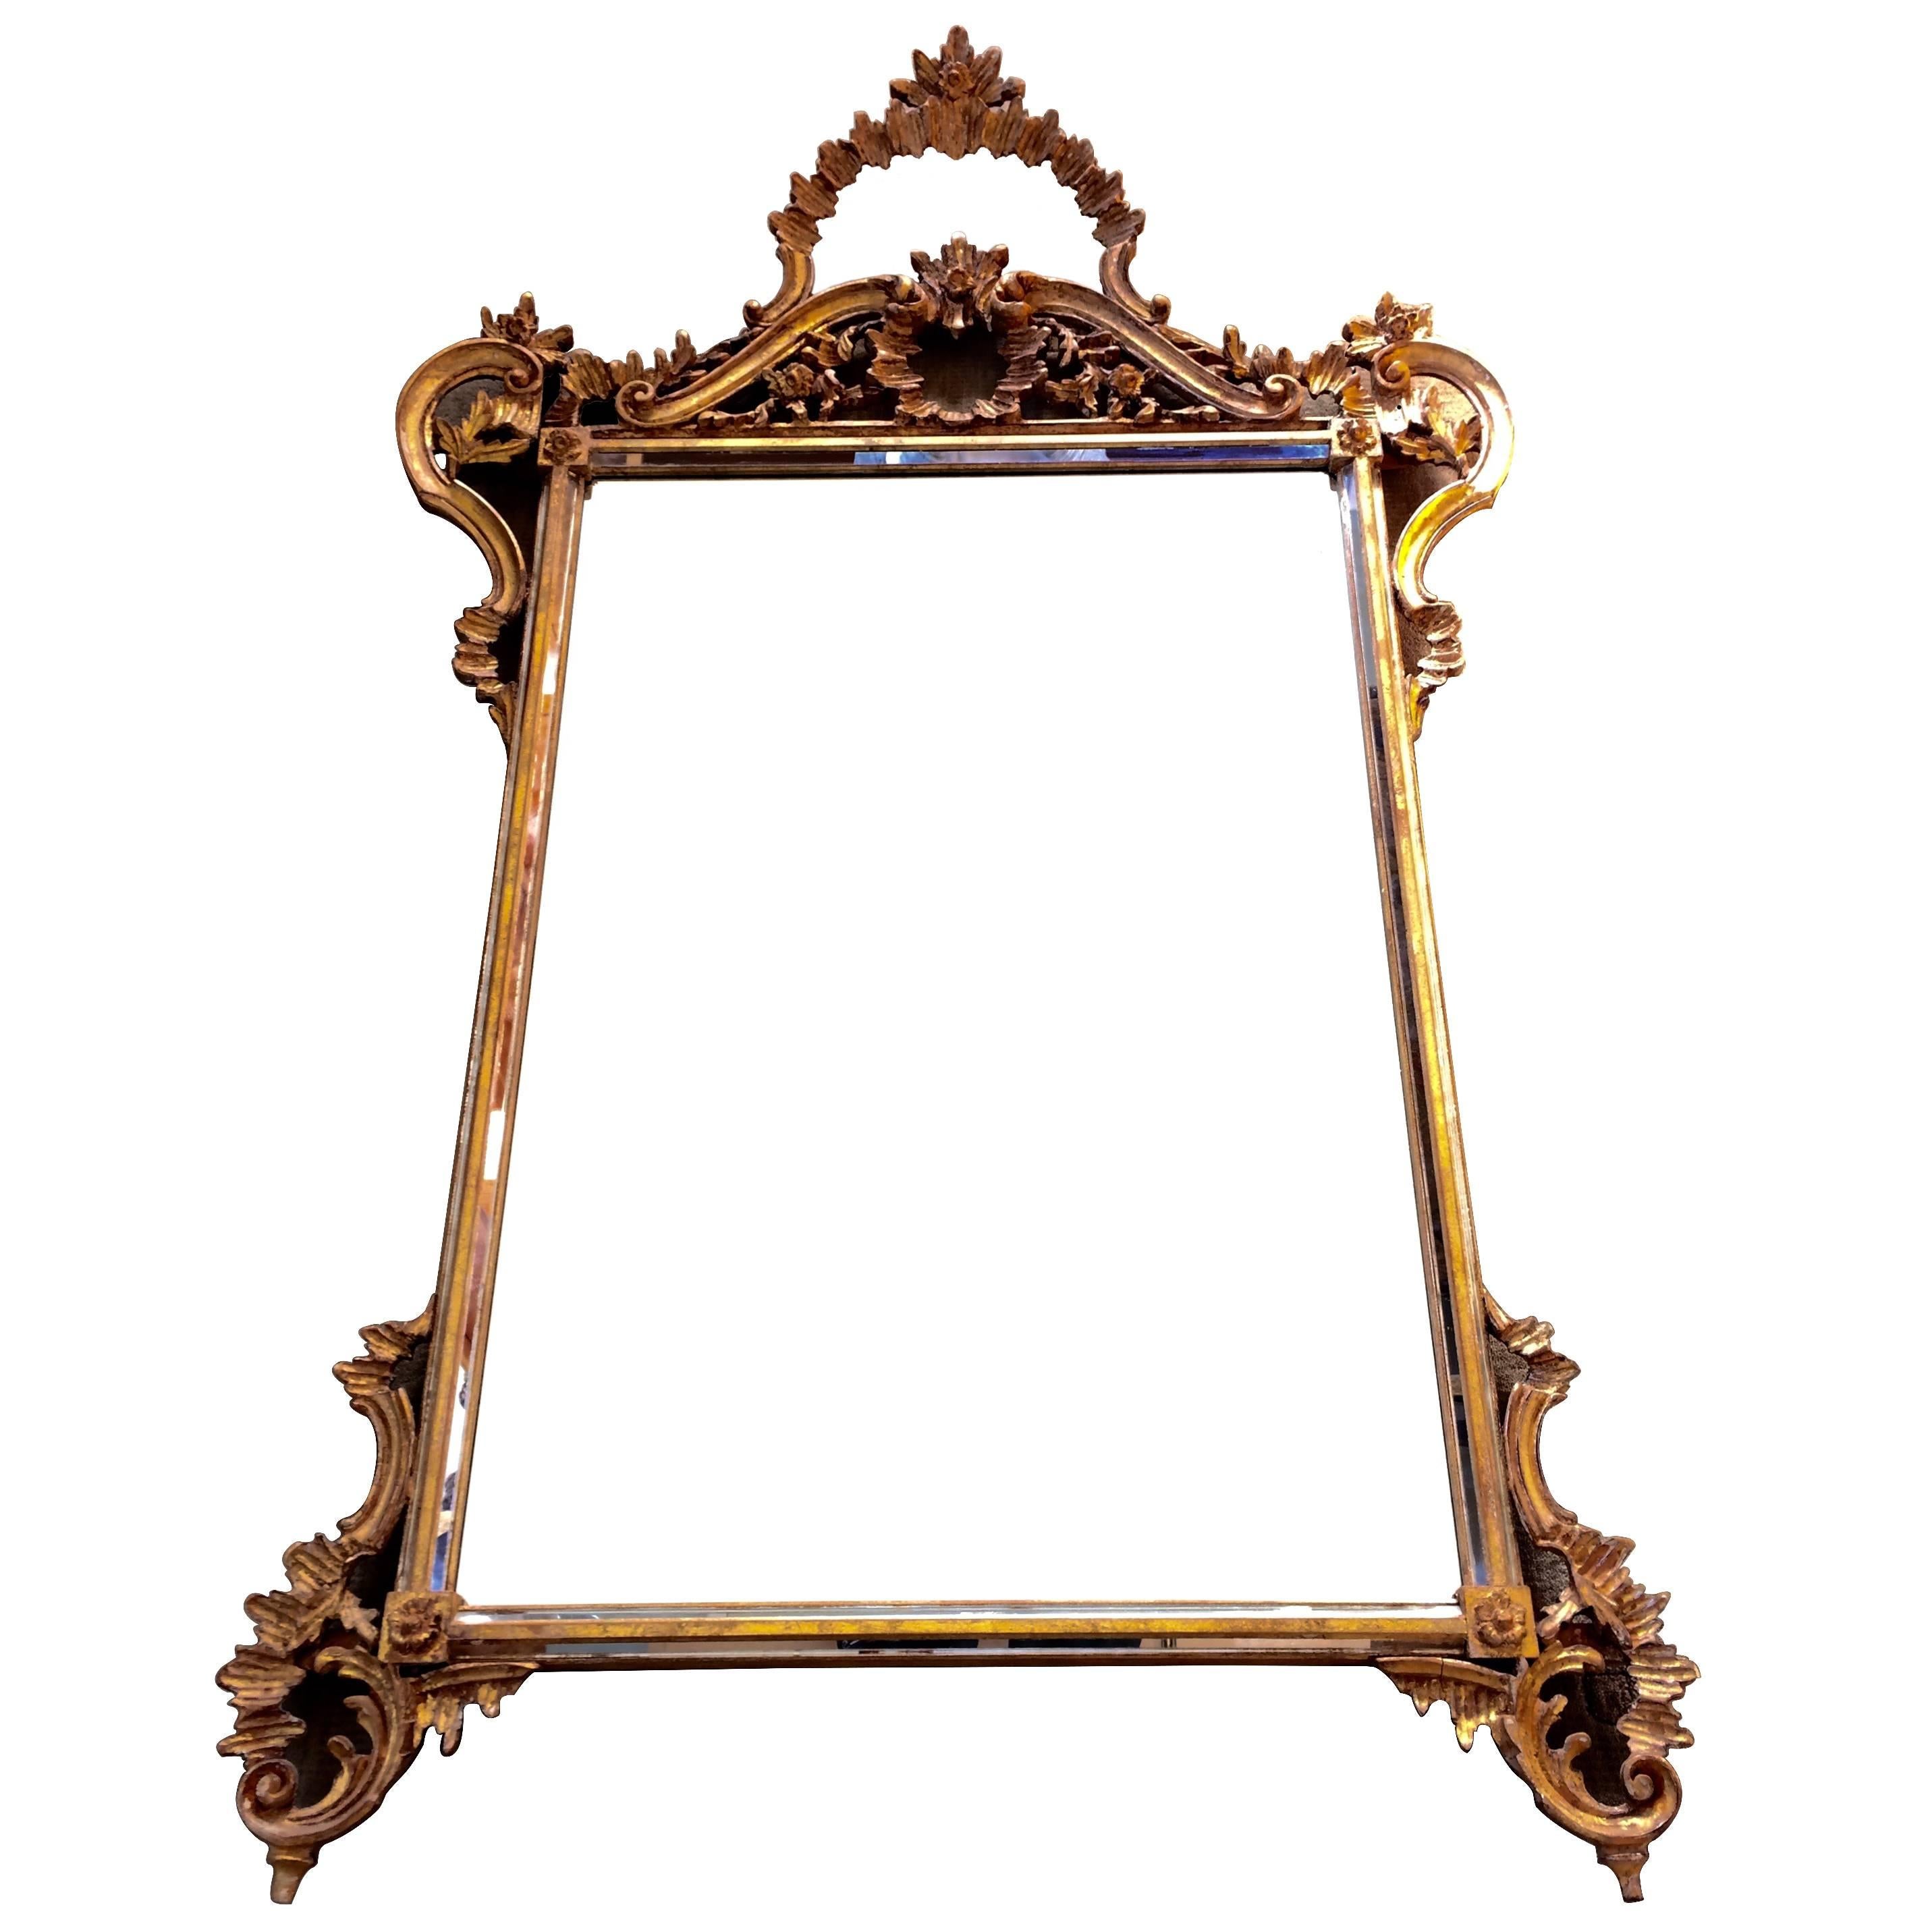 Gorgeous Ornate Giltwood Mirror by Labarge